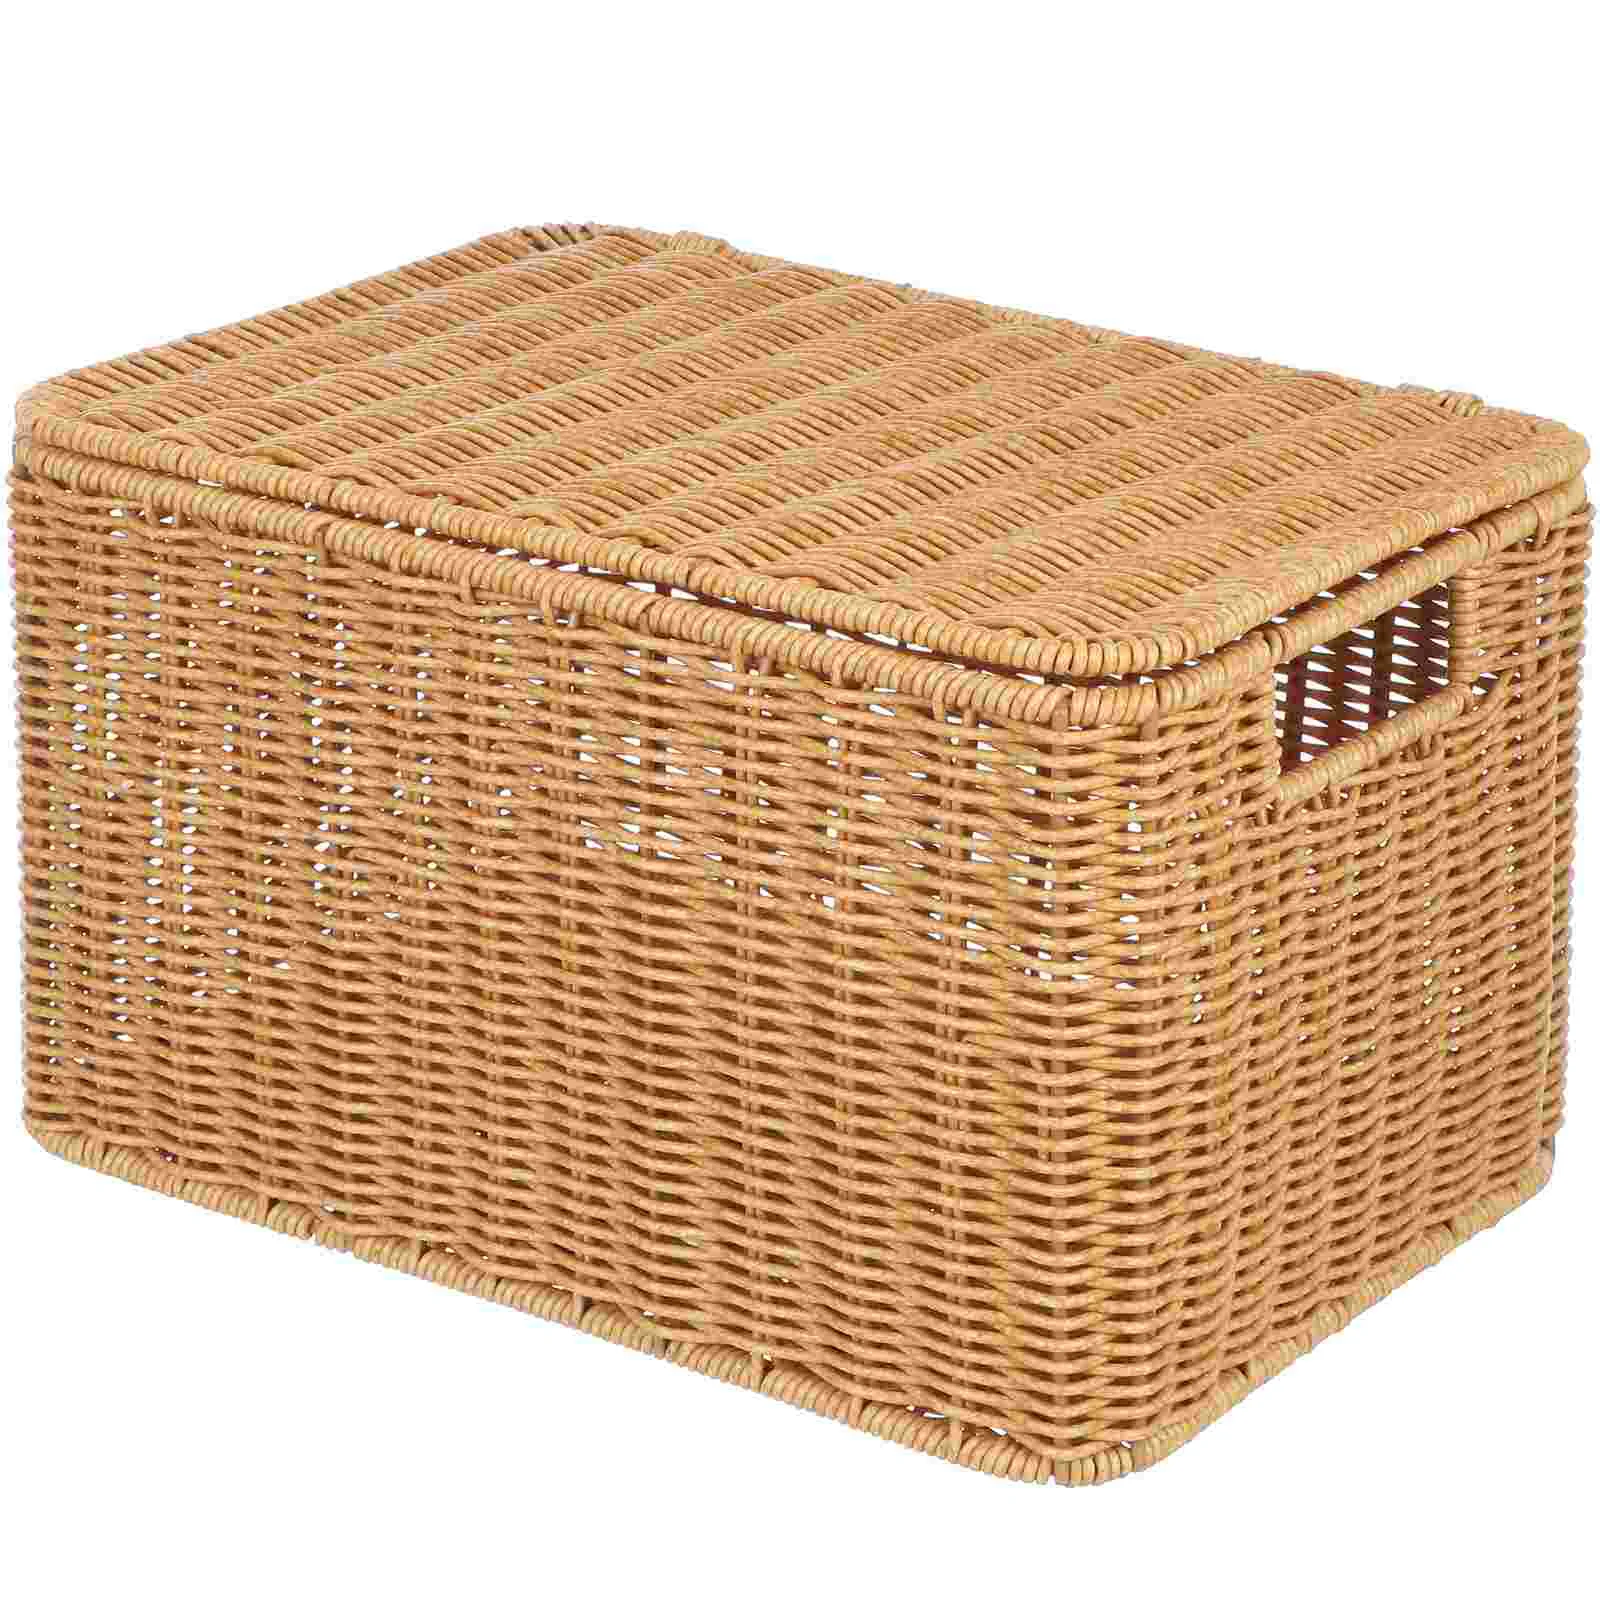 

Cube Storage Boxes With Lids And Metal Frame Woven Storage Basket Multipurpose Sundries Basket Wicker Storage Box Cube Storage